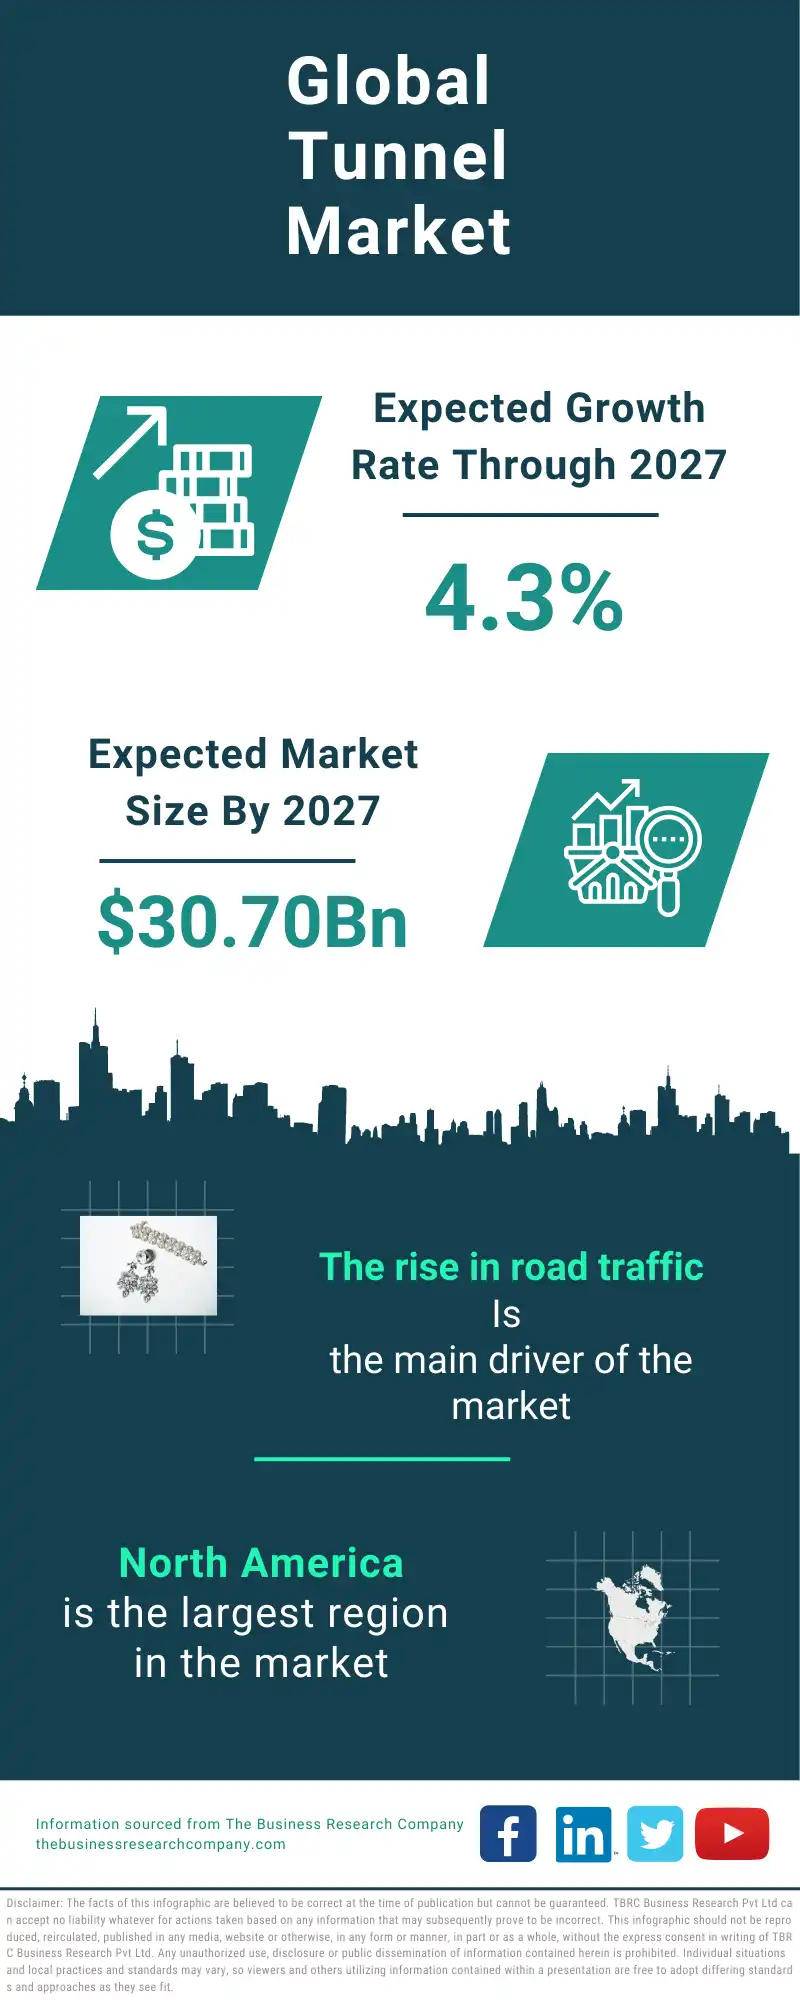 Tunnel Global Market Report 2023